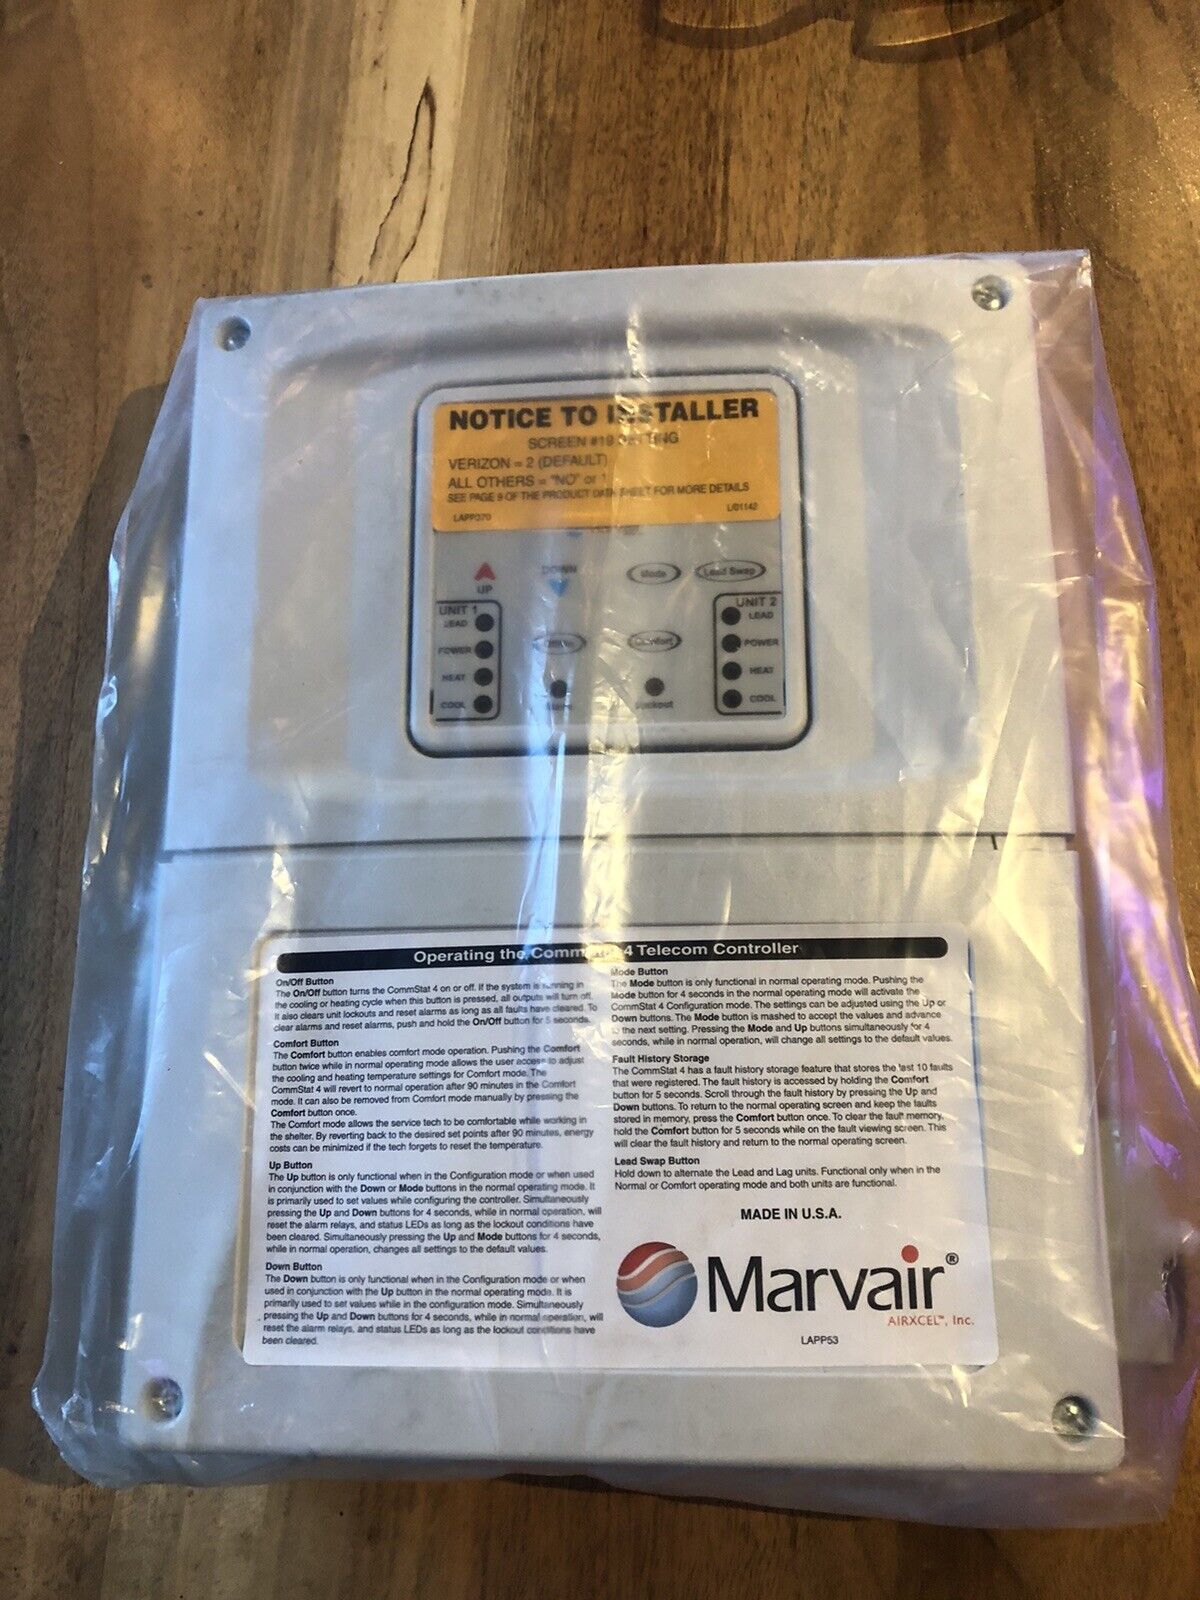 Marvair S07846 Commstat 4 Controller